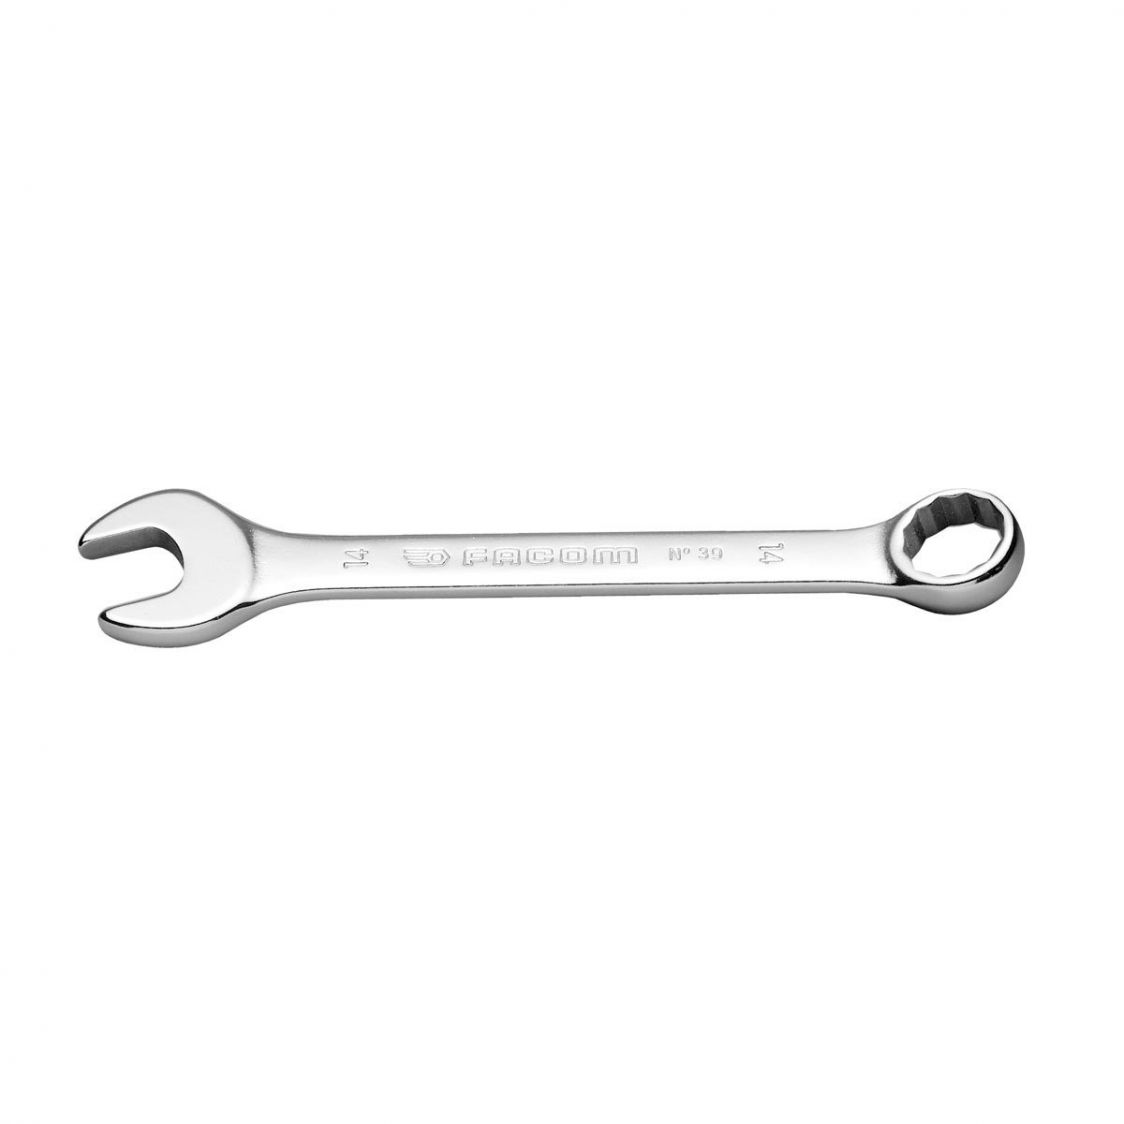 FACOM 39.11 - 11mm Metric Stubby Combination Spanner